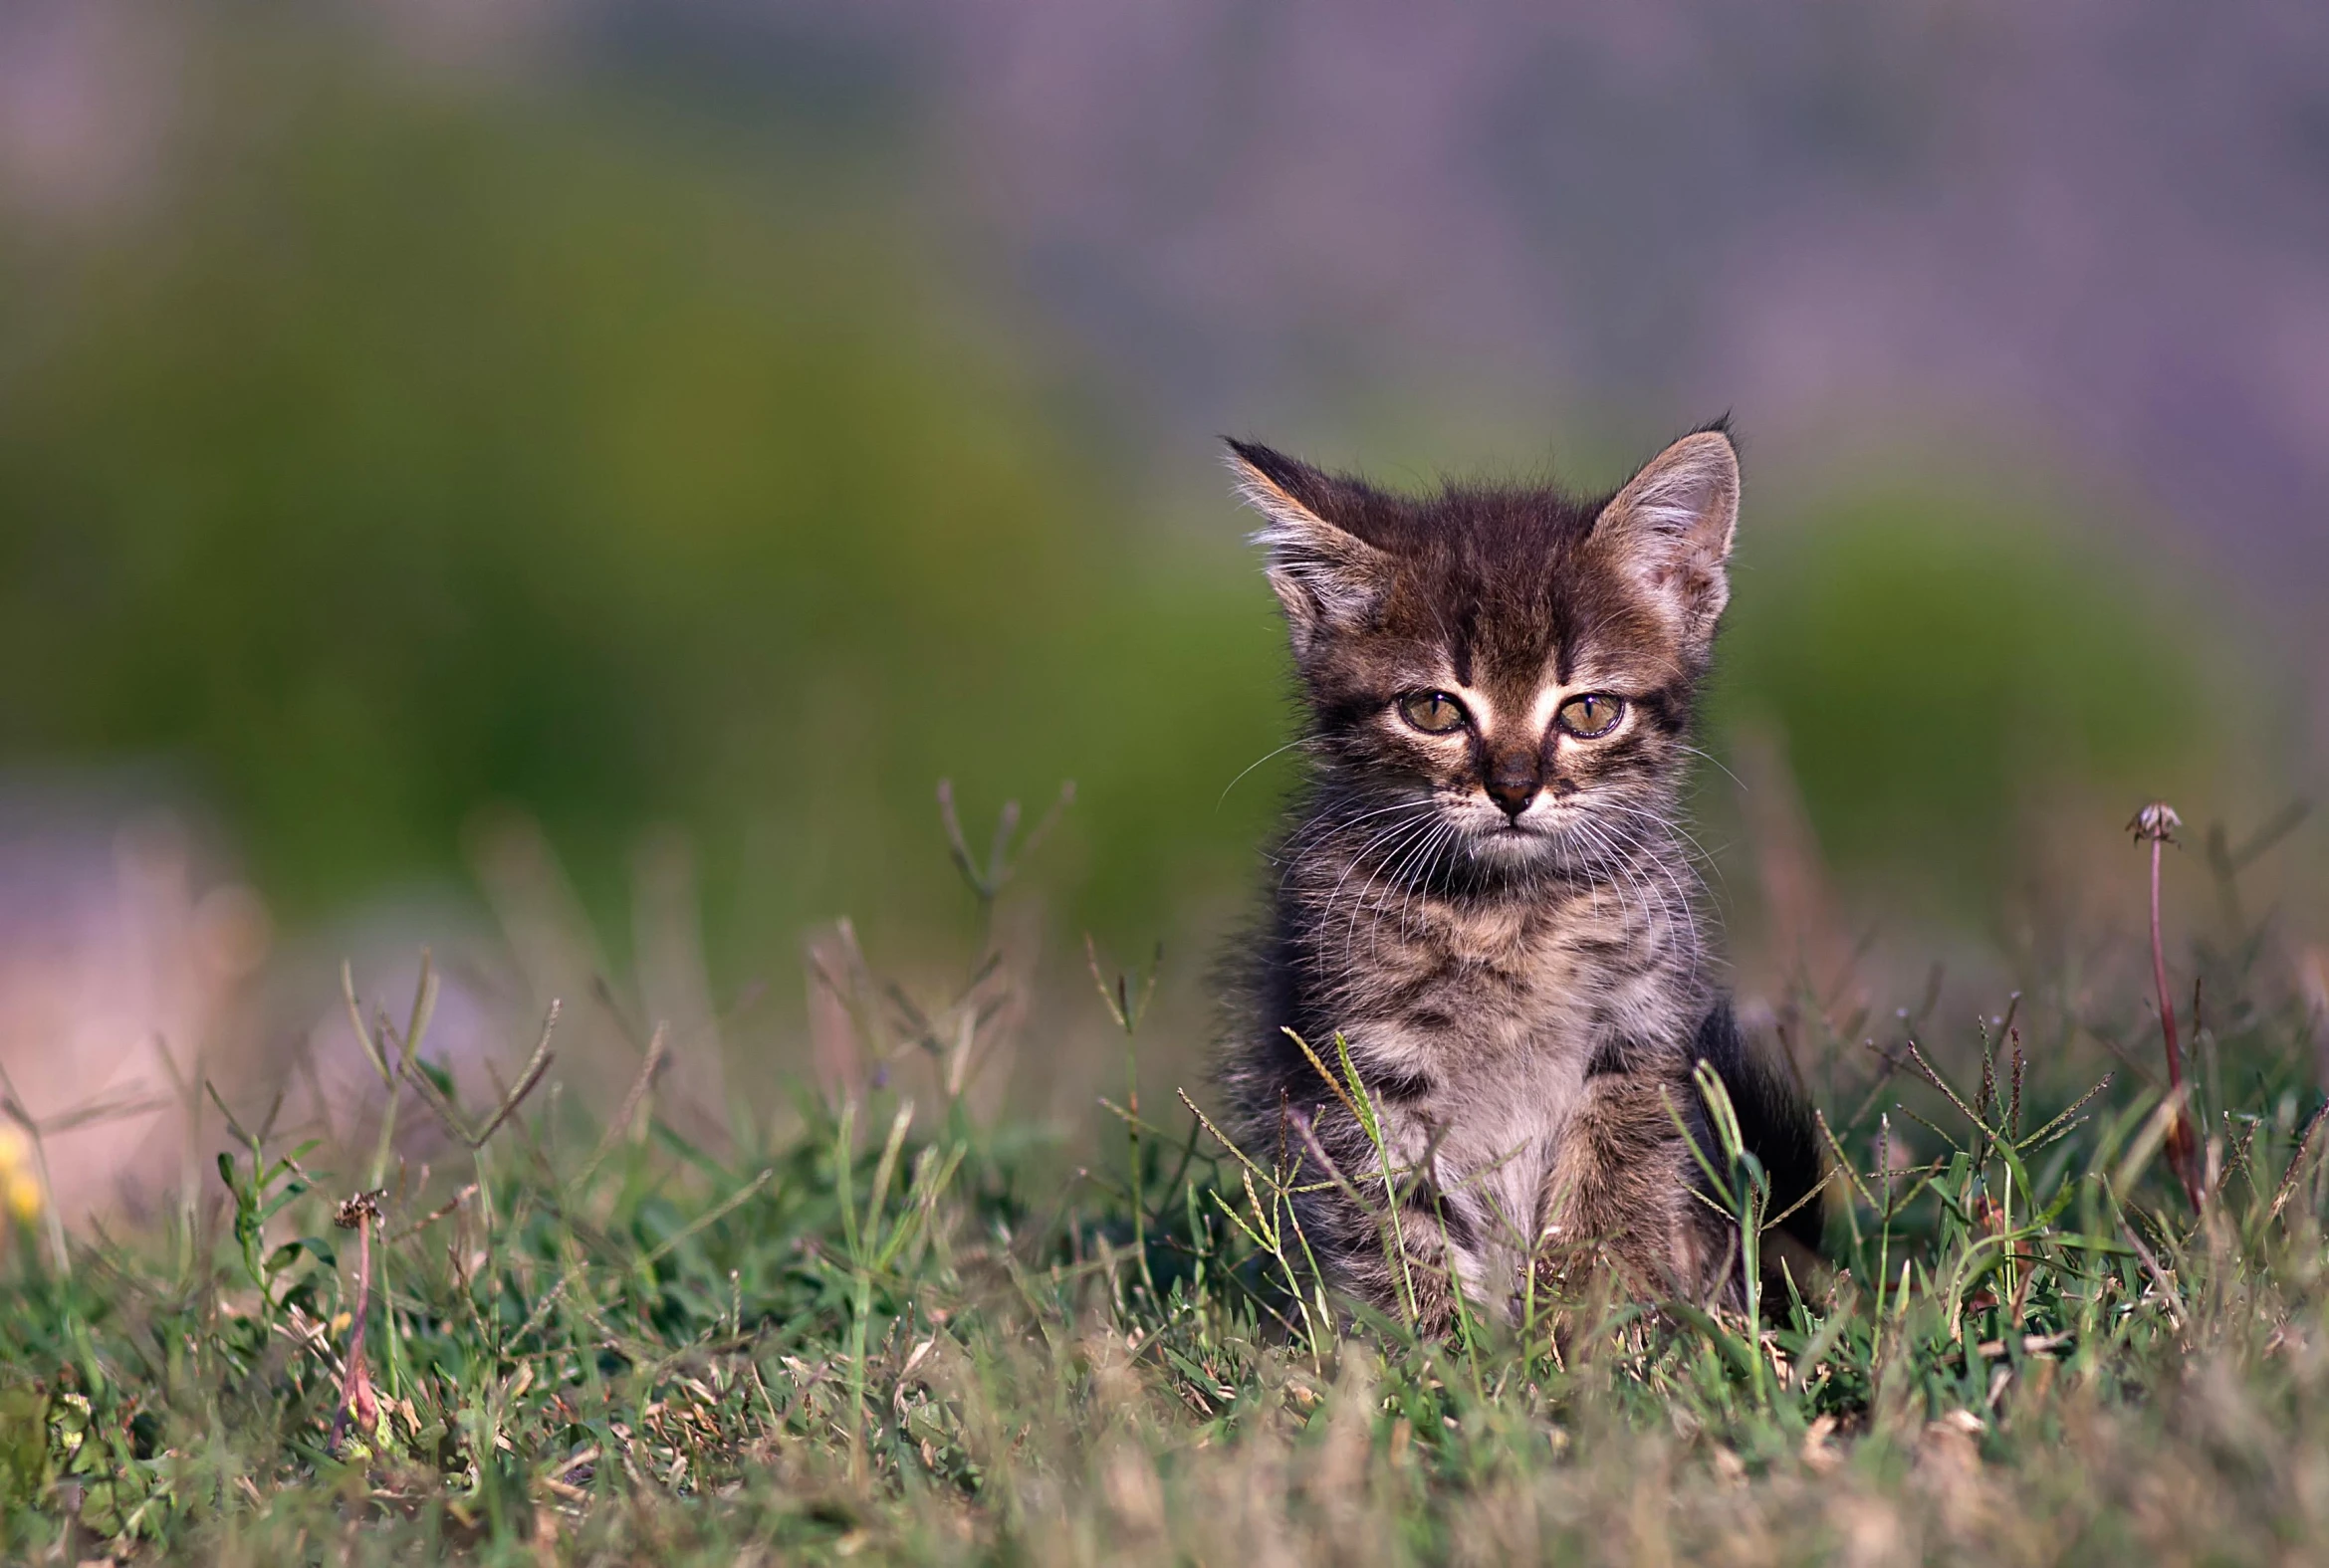 a small kitten sitting on top of a lush green field, frowning, highly realistic photograph, 2019 trending photo, getty images